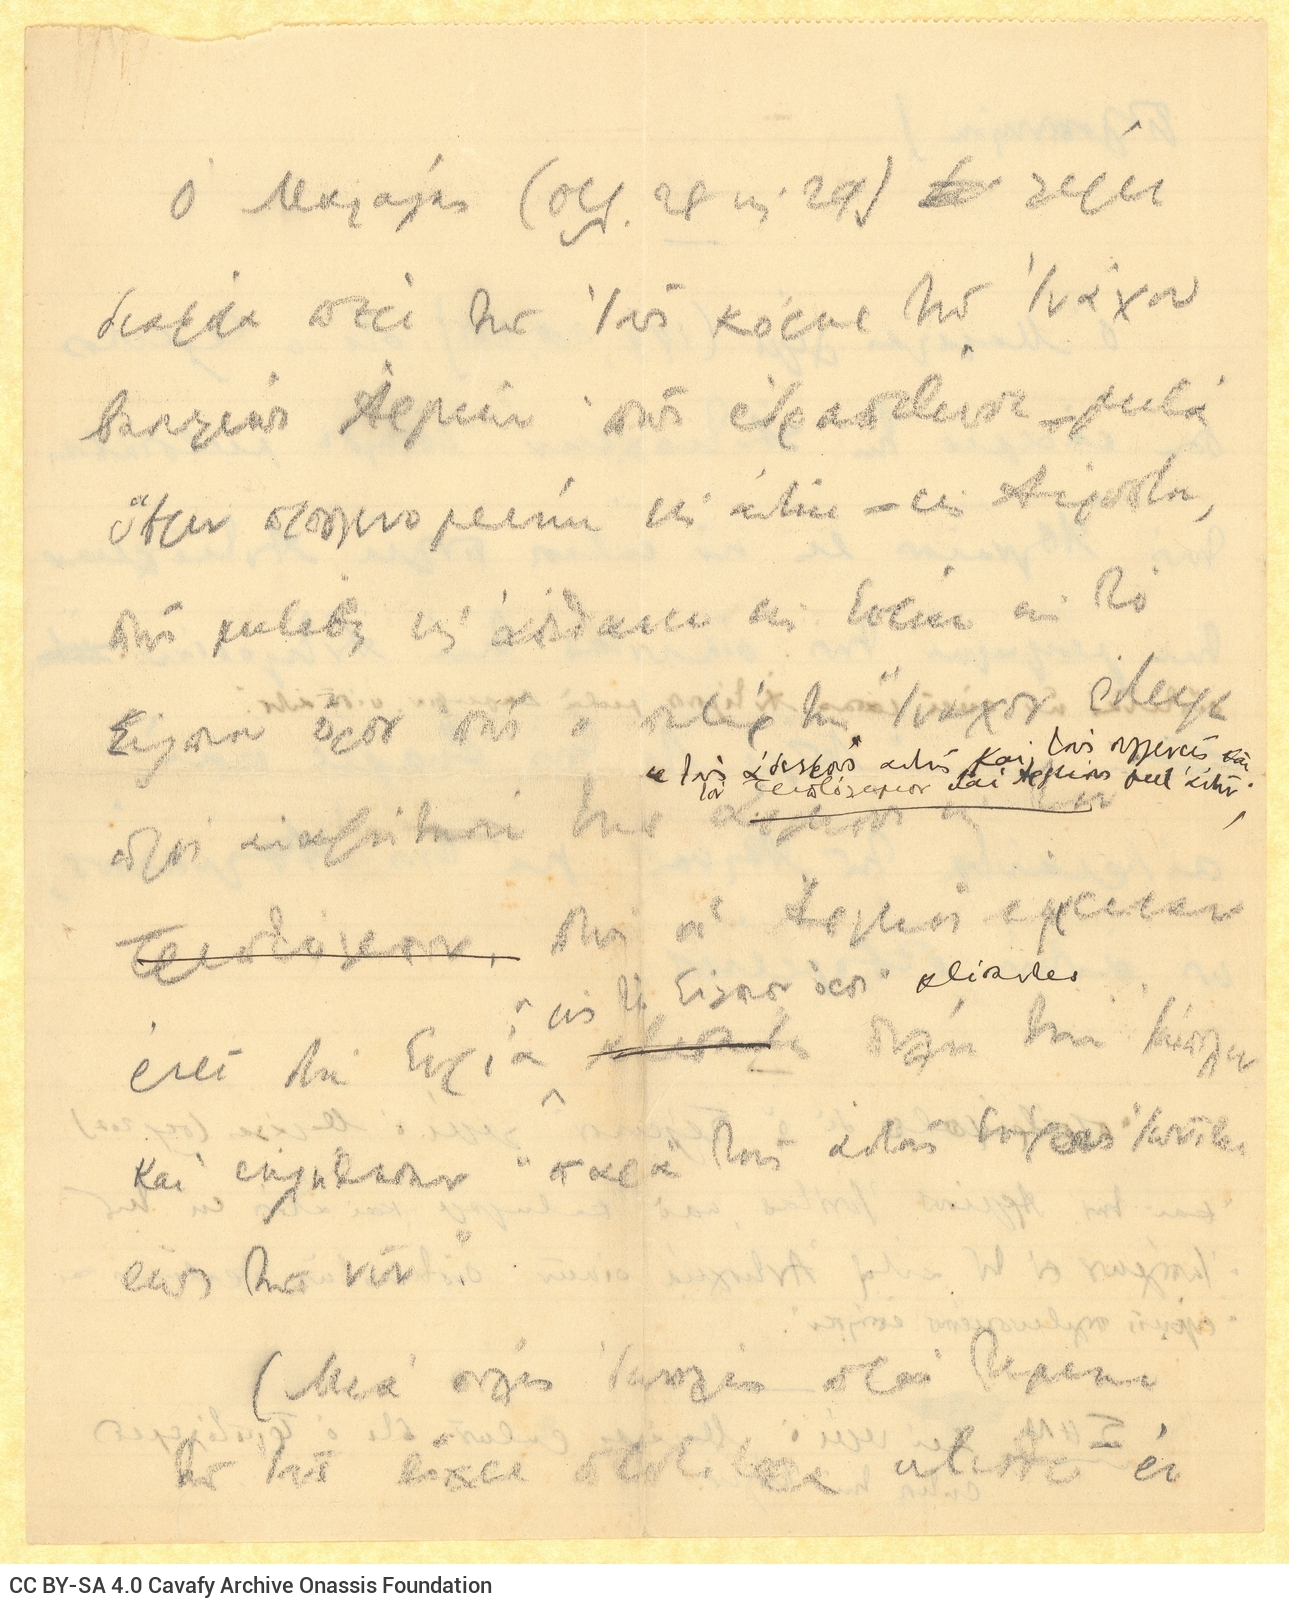 Handwritten notes on both sides of a ruled sheet, νf a piece of paper, and on a printed broadsheet with the poem "Caesari